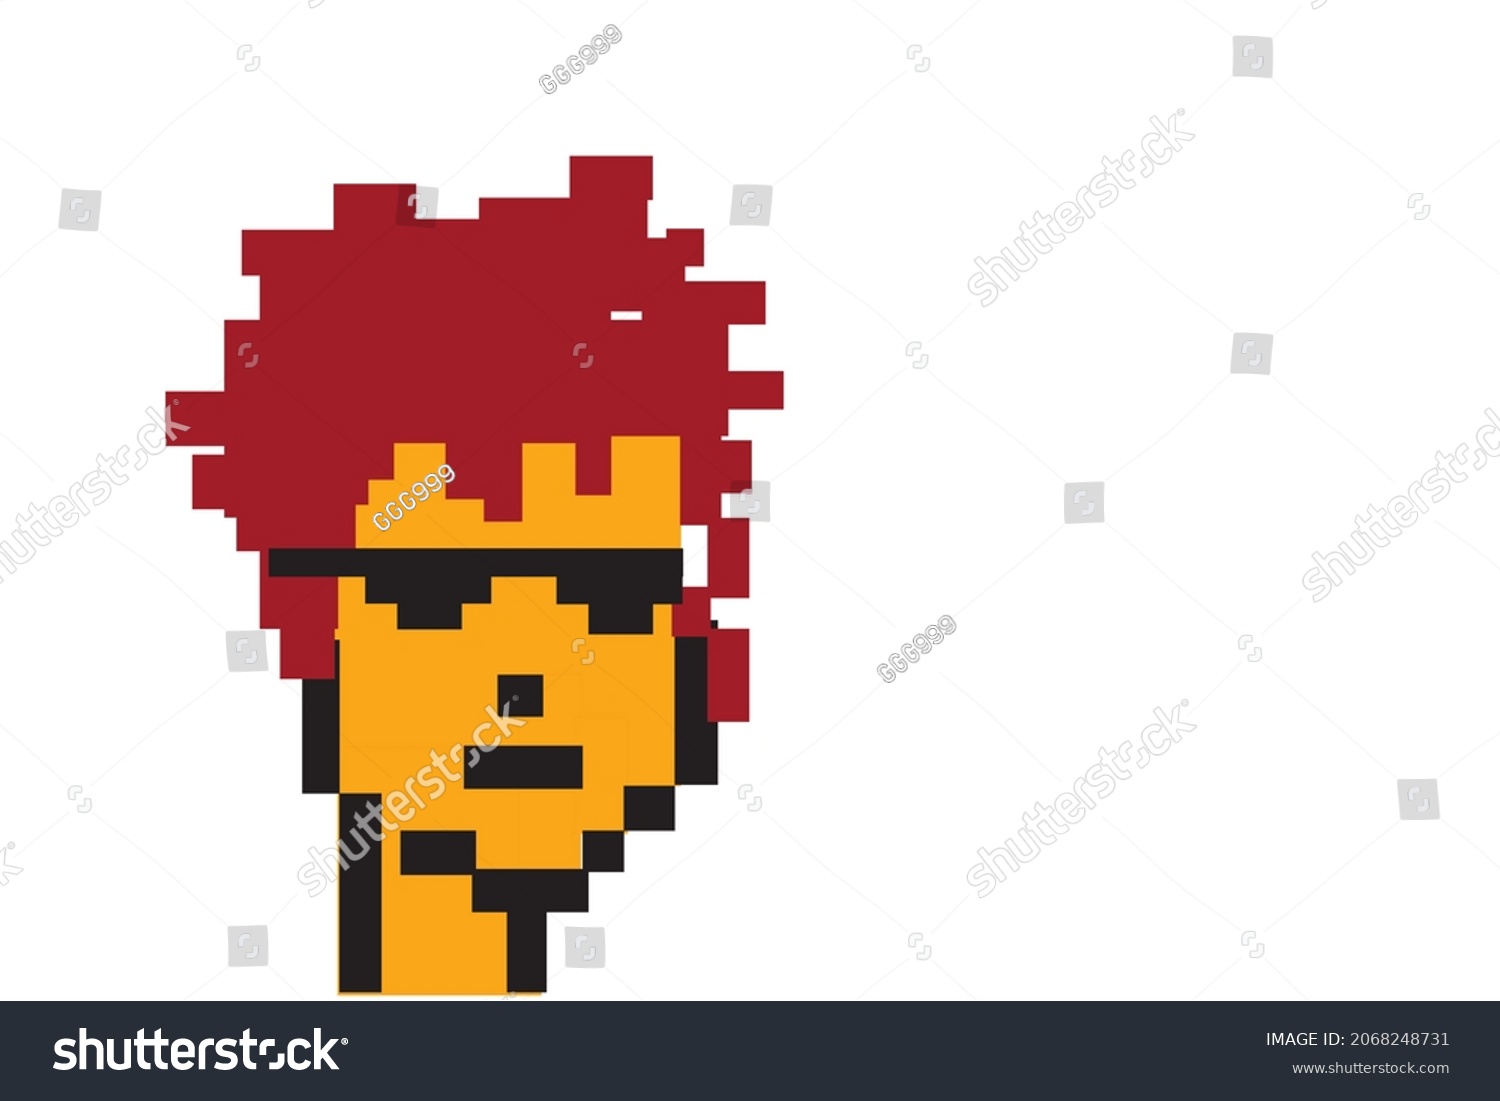 SVG of Cryptopunk NFT blockchain, non fungible. Pixel art character svg